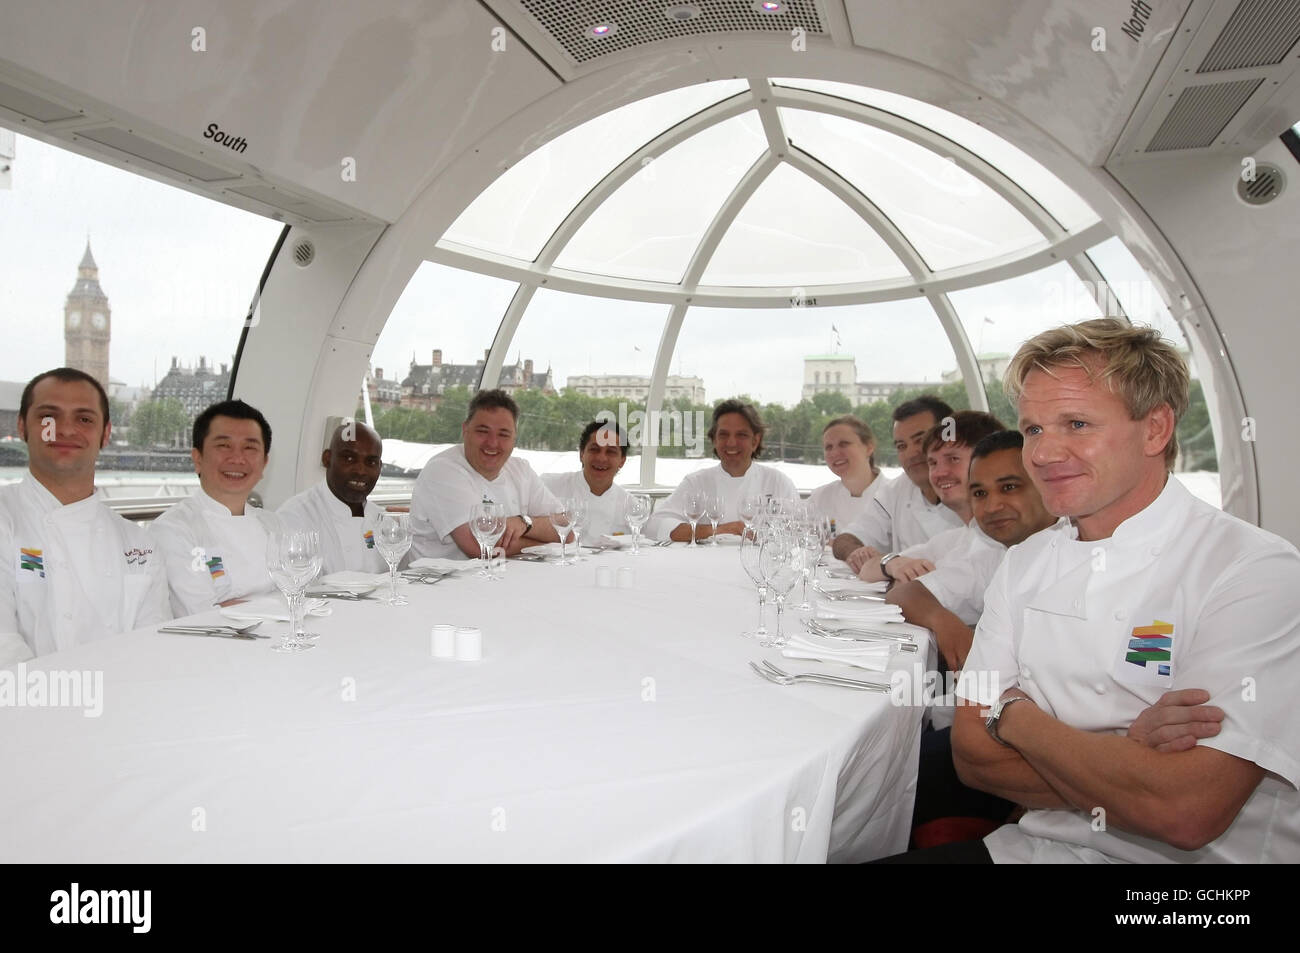 (Left to right) chefs Dean Yasharian, Tong Chee Hwee, Gary Lee, Richard Corrigan, Francesco Mazzei, Georgio Locatelli, Angela Hartnett, Joel Antunes, Kevin Gratton, Jitin Joshi and Gordon Ramsay sit around a dining table in a capsule of the London Eye, which is to be turned into a revolving restaurant for the London Restaurant Festival, which runs from 4 - 18 October 2010. Stock Photo